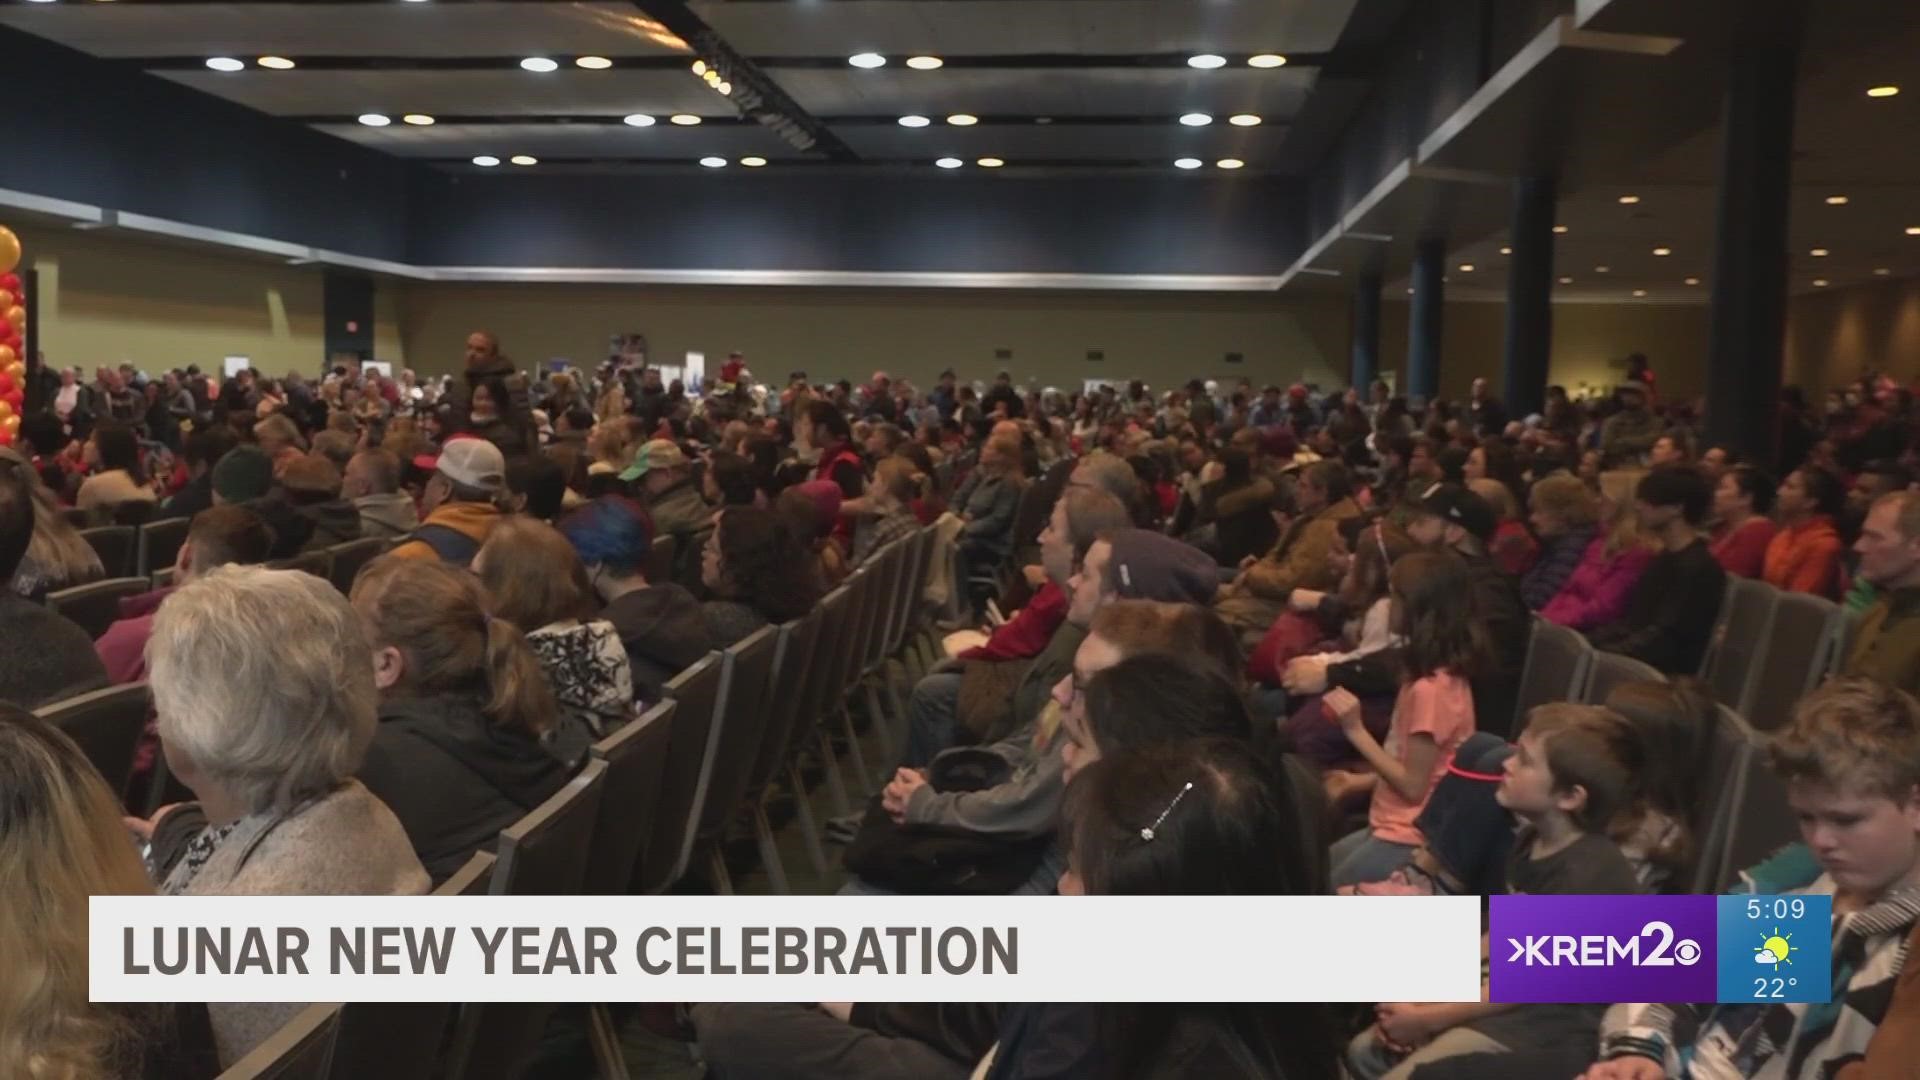 Lunar New Year festivities at the Spokane Convention Center kickoff at 1 p.m. Fireworks will round out the event at 7 p.m. to ring in the Year of the Rabbit.